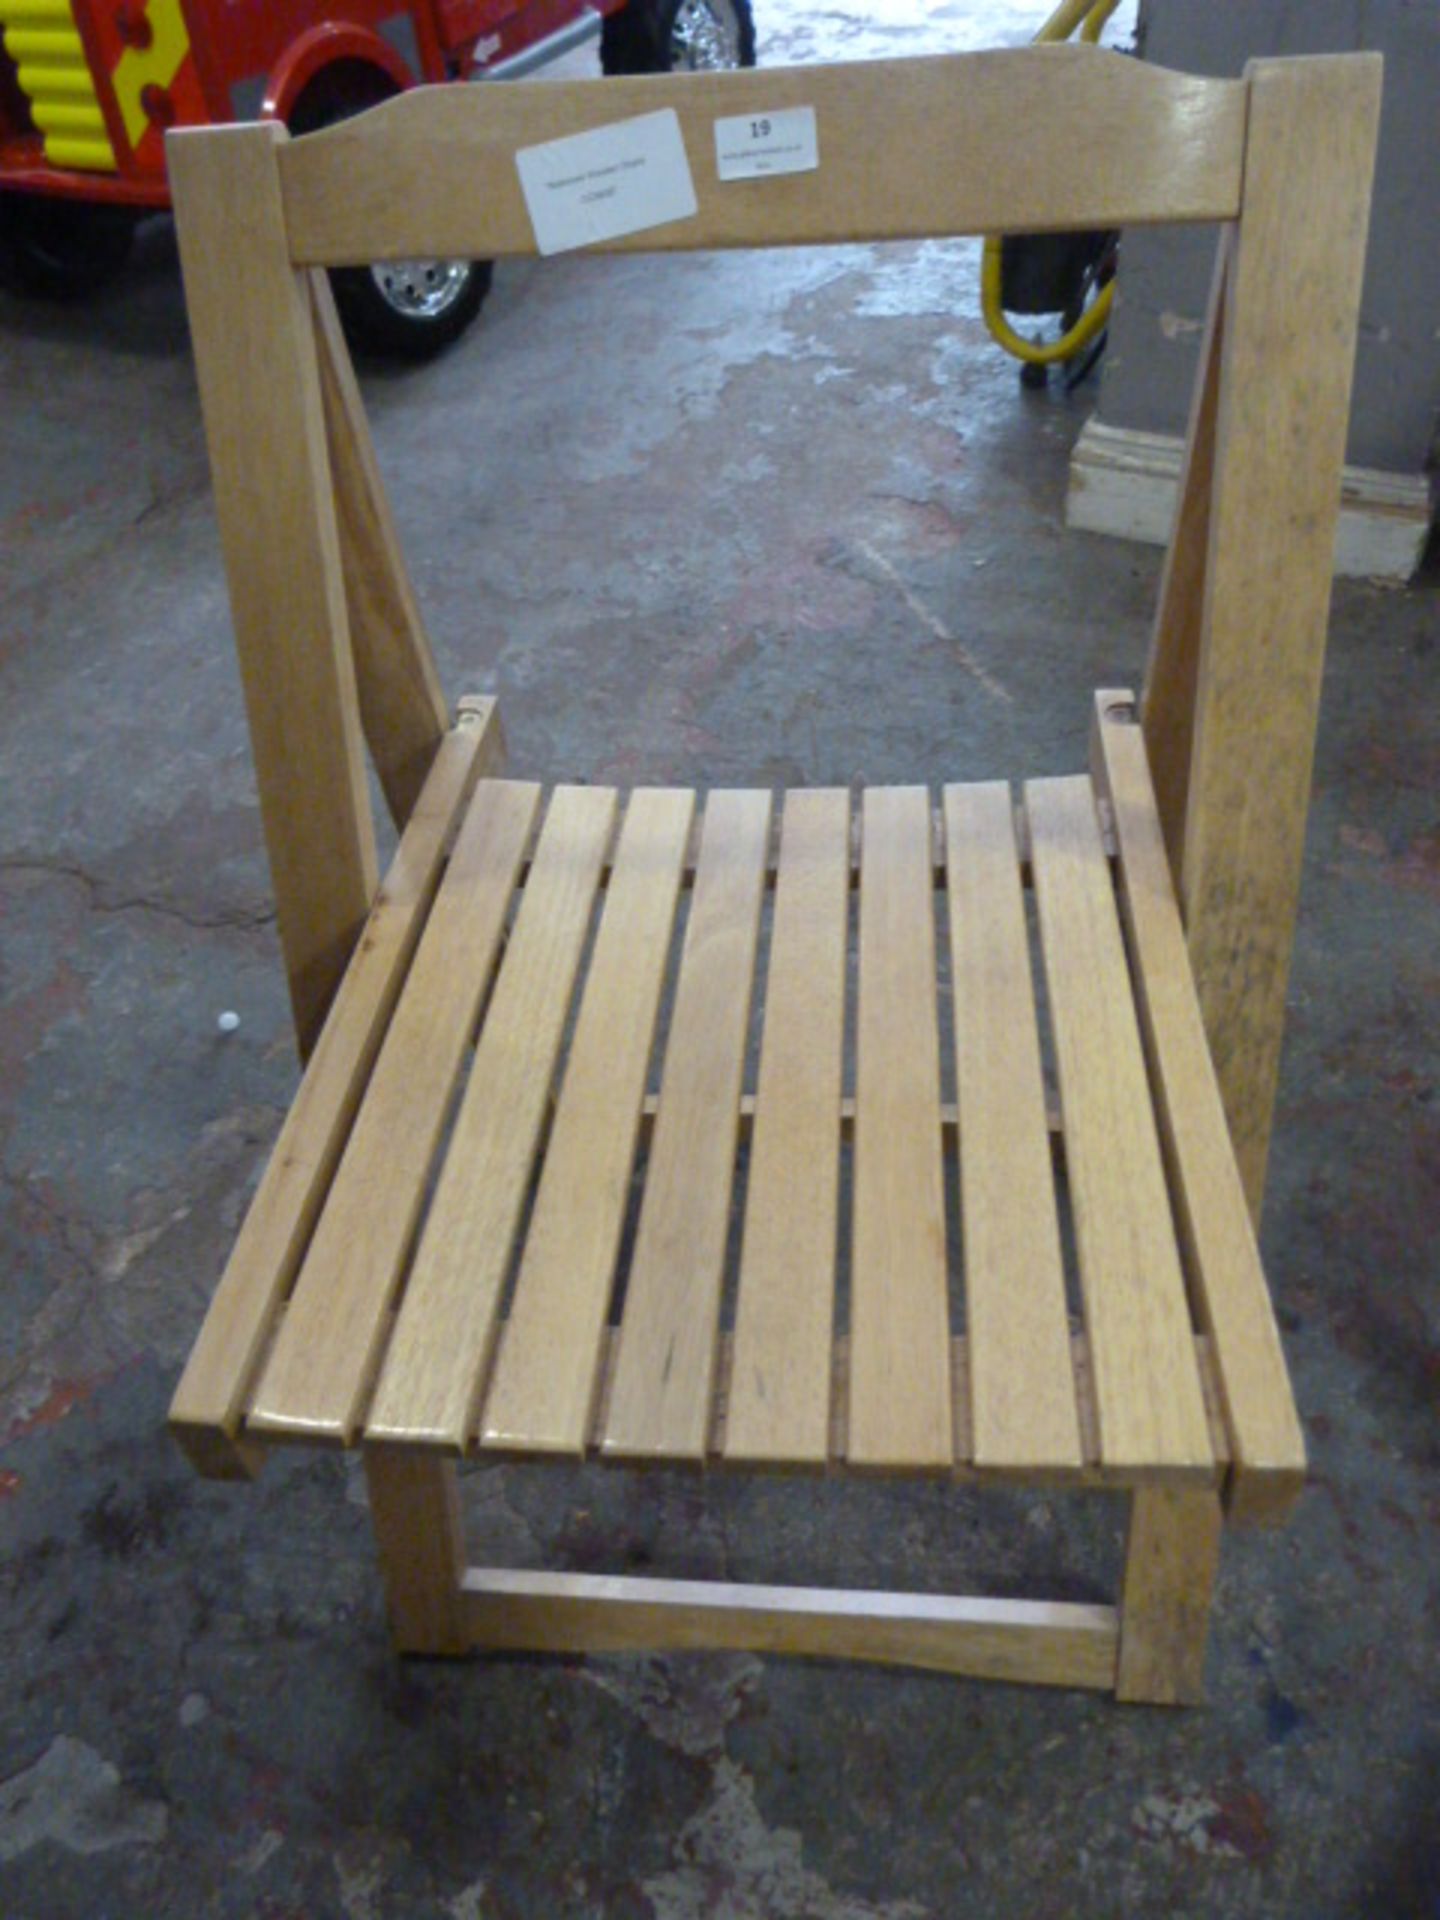 *Stakmore Wooden Chair